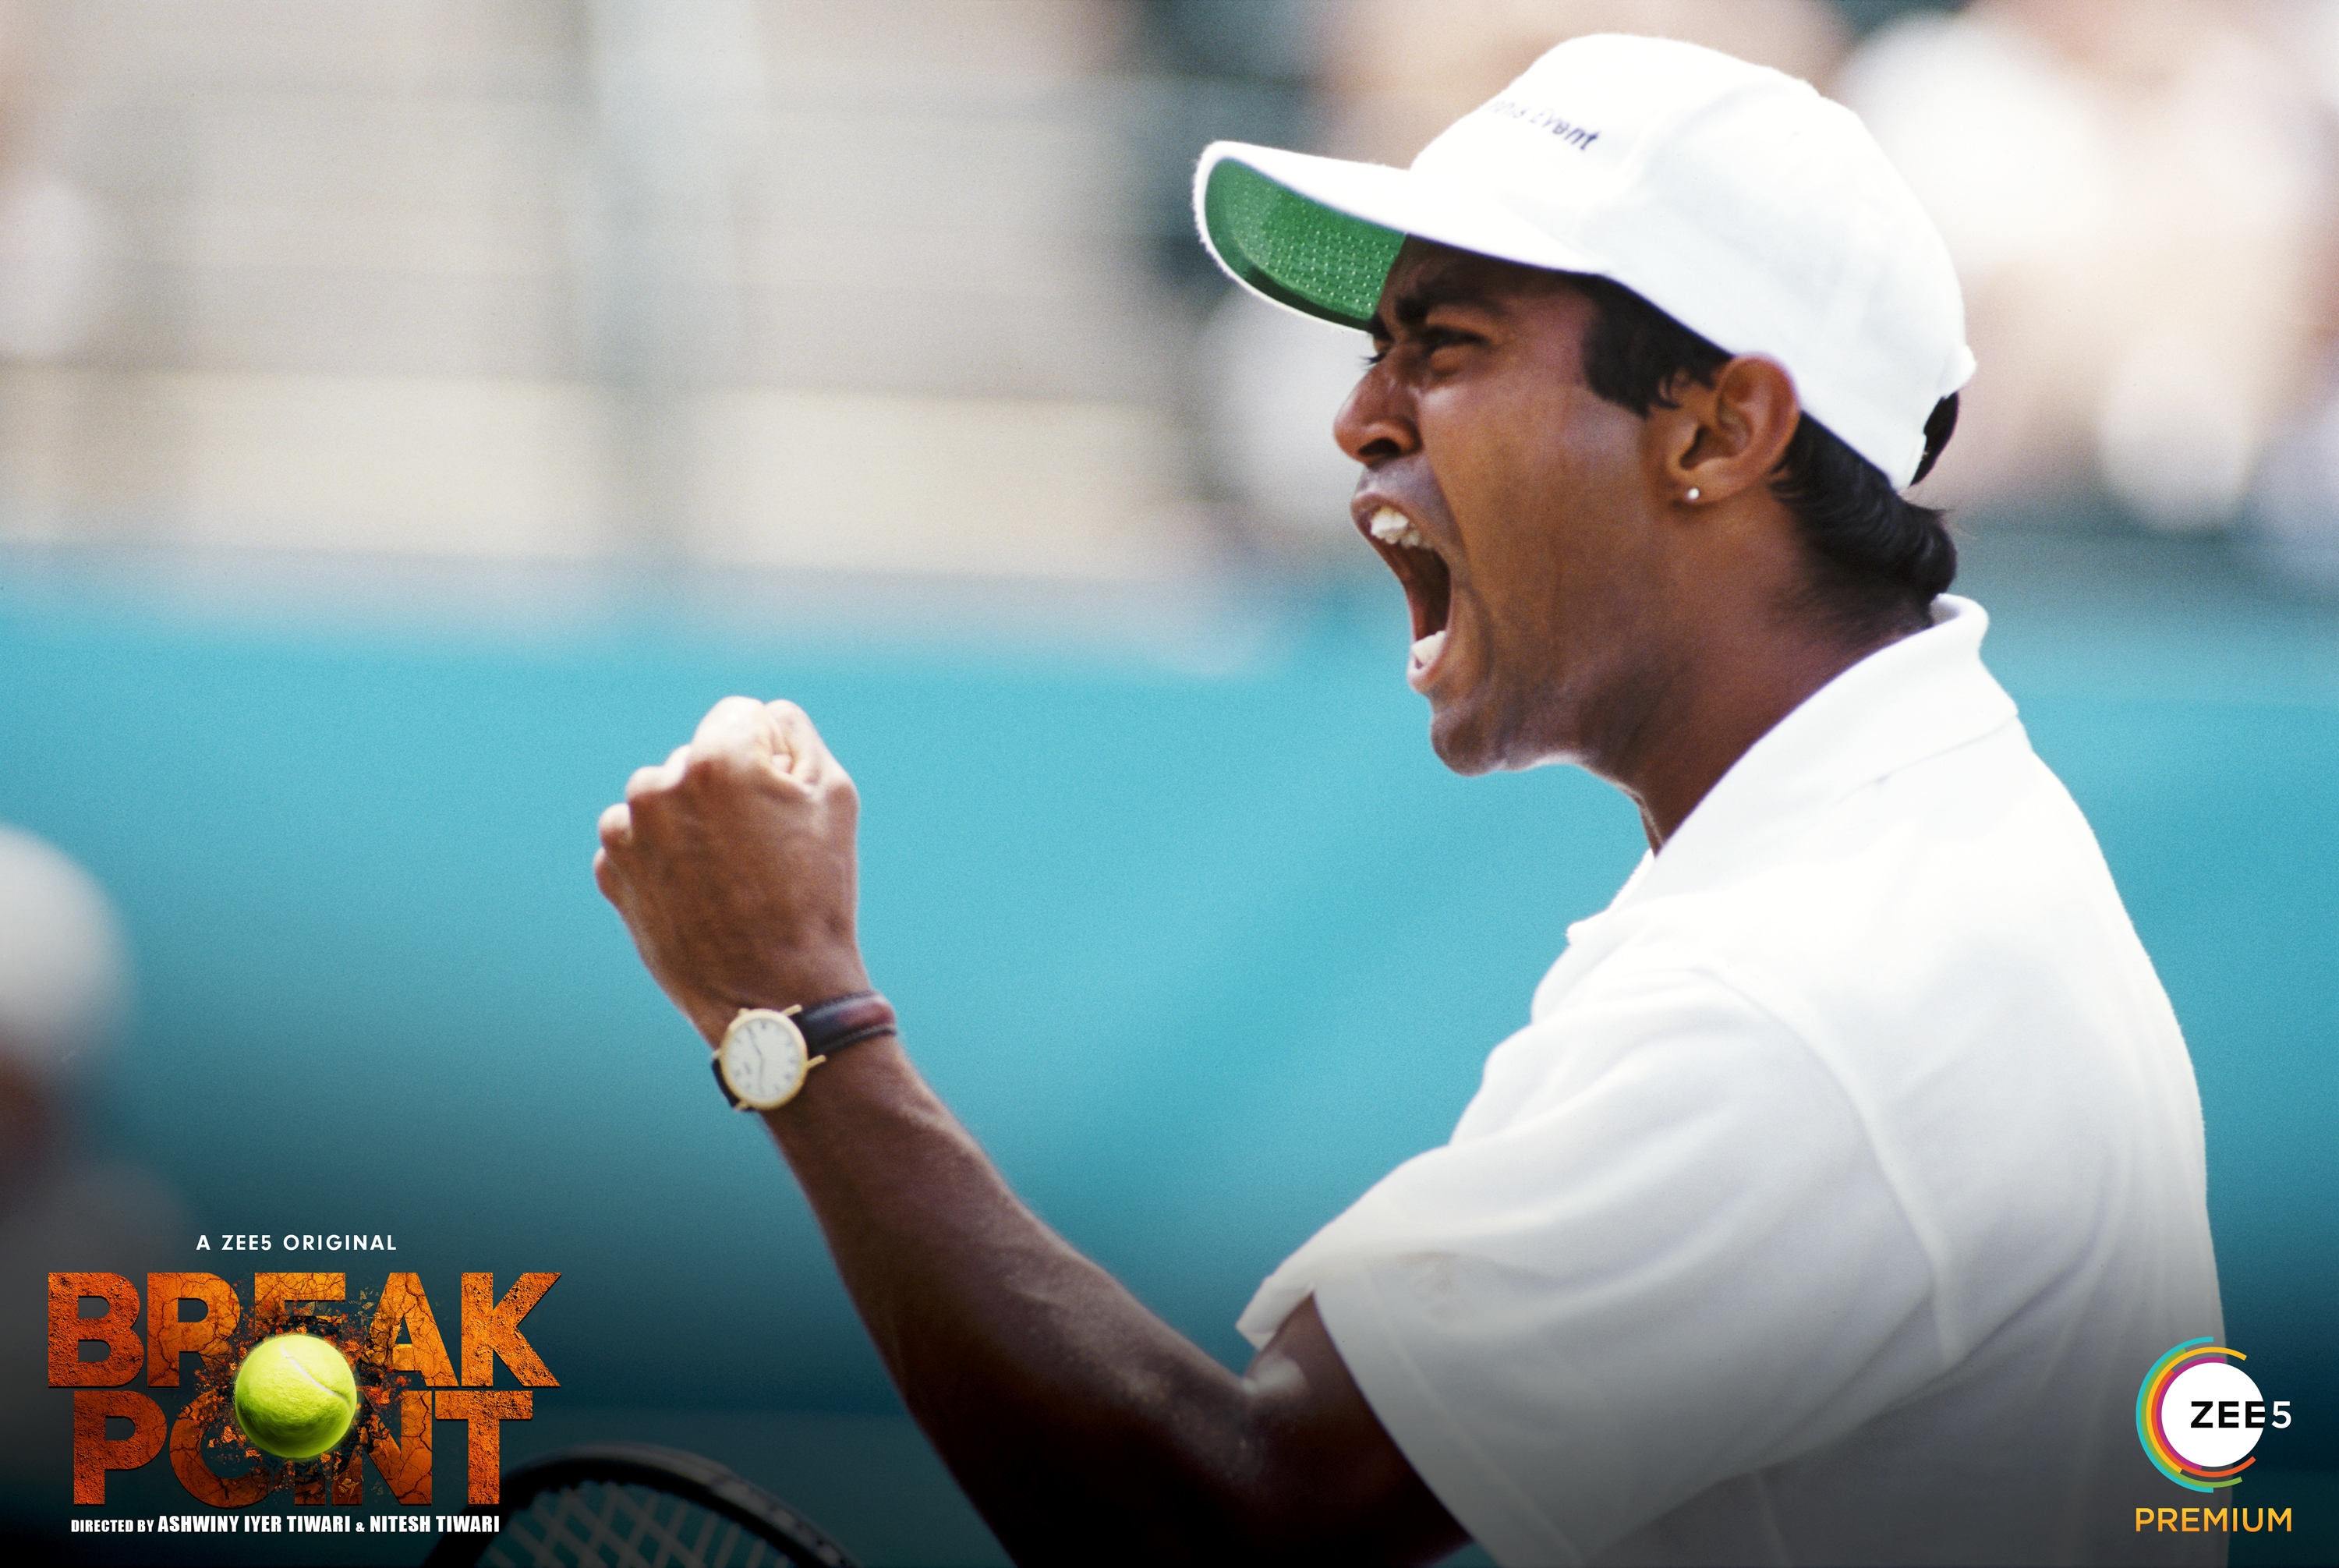 Leander Paes on court, in a publicity still for Break Point.